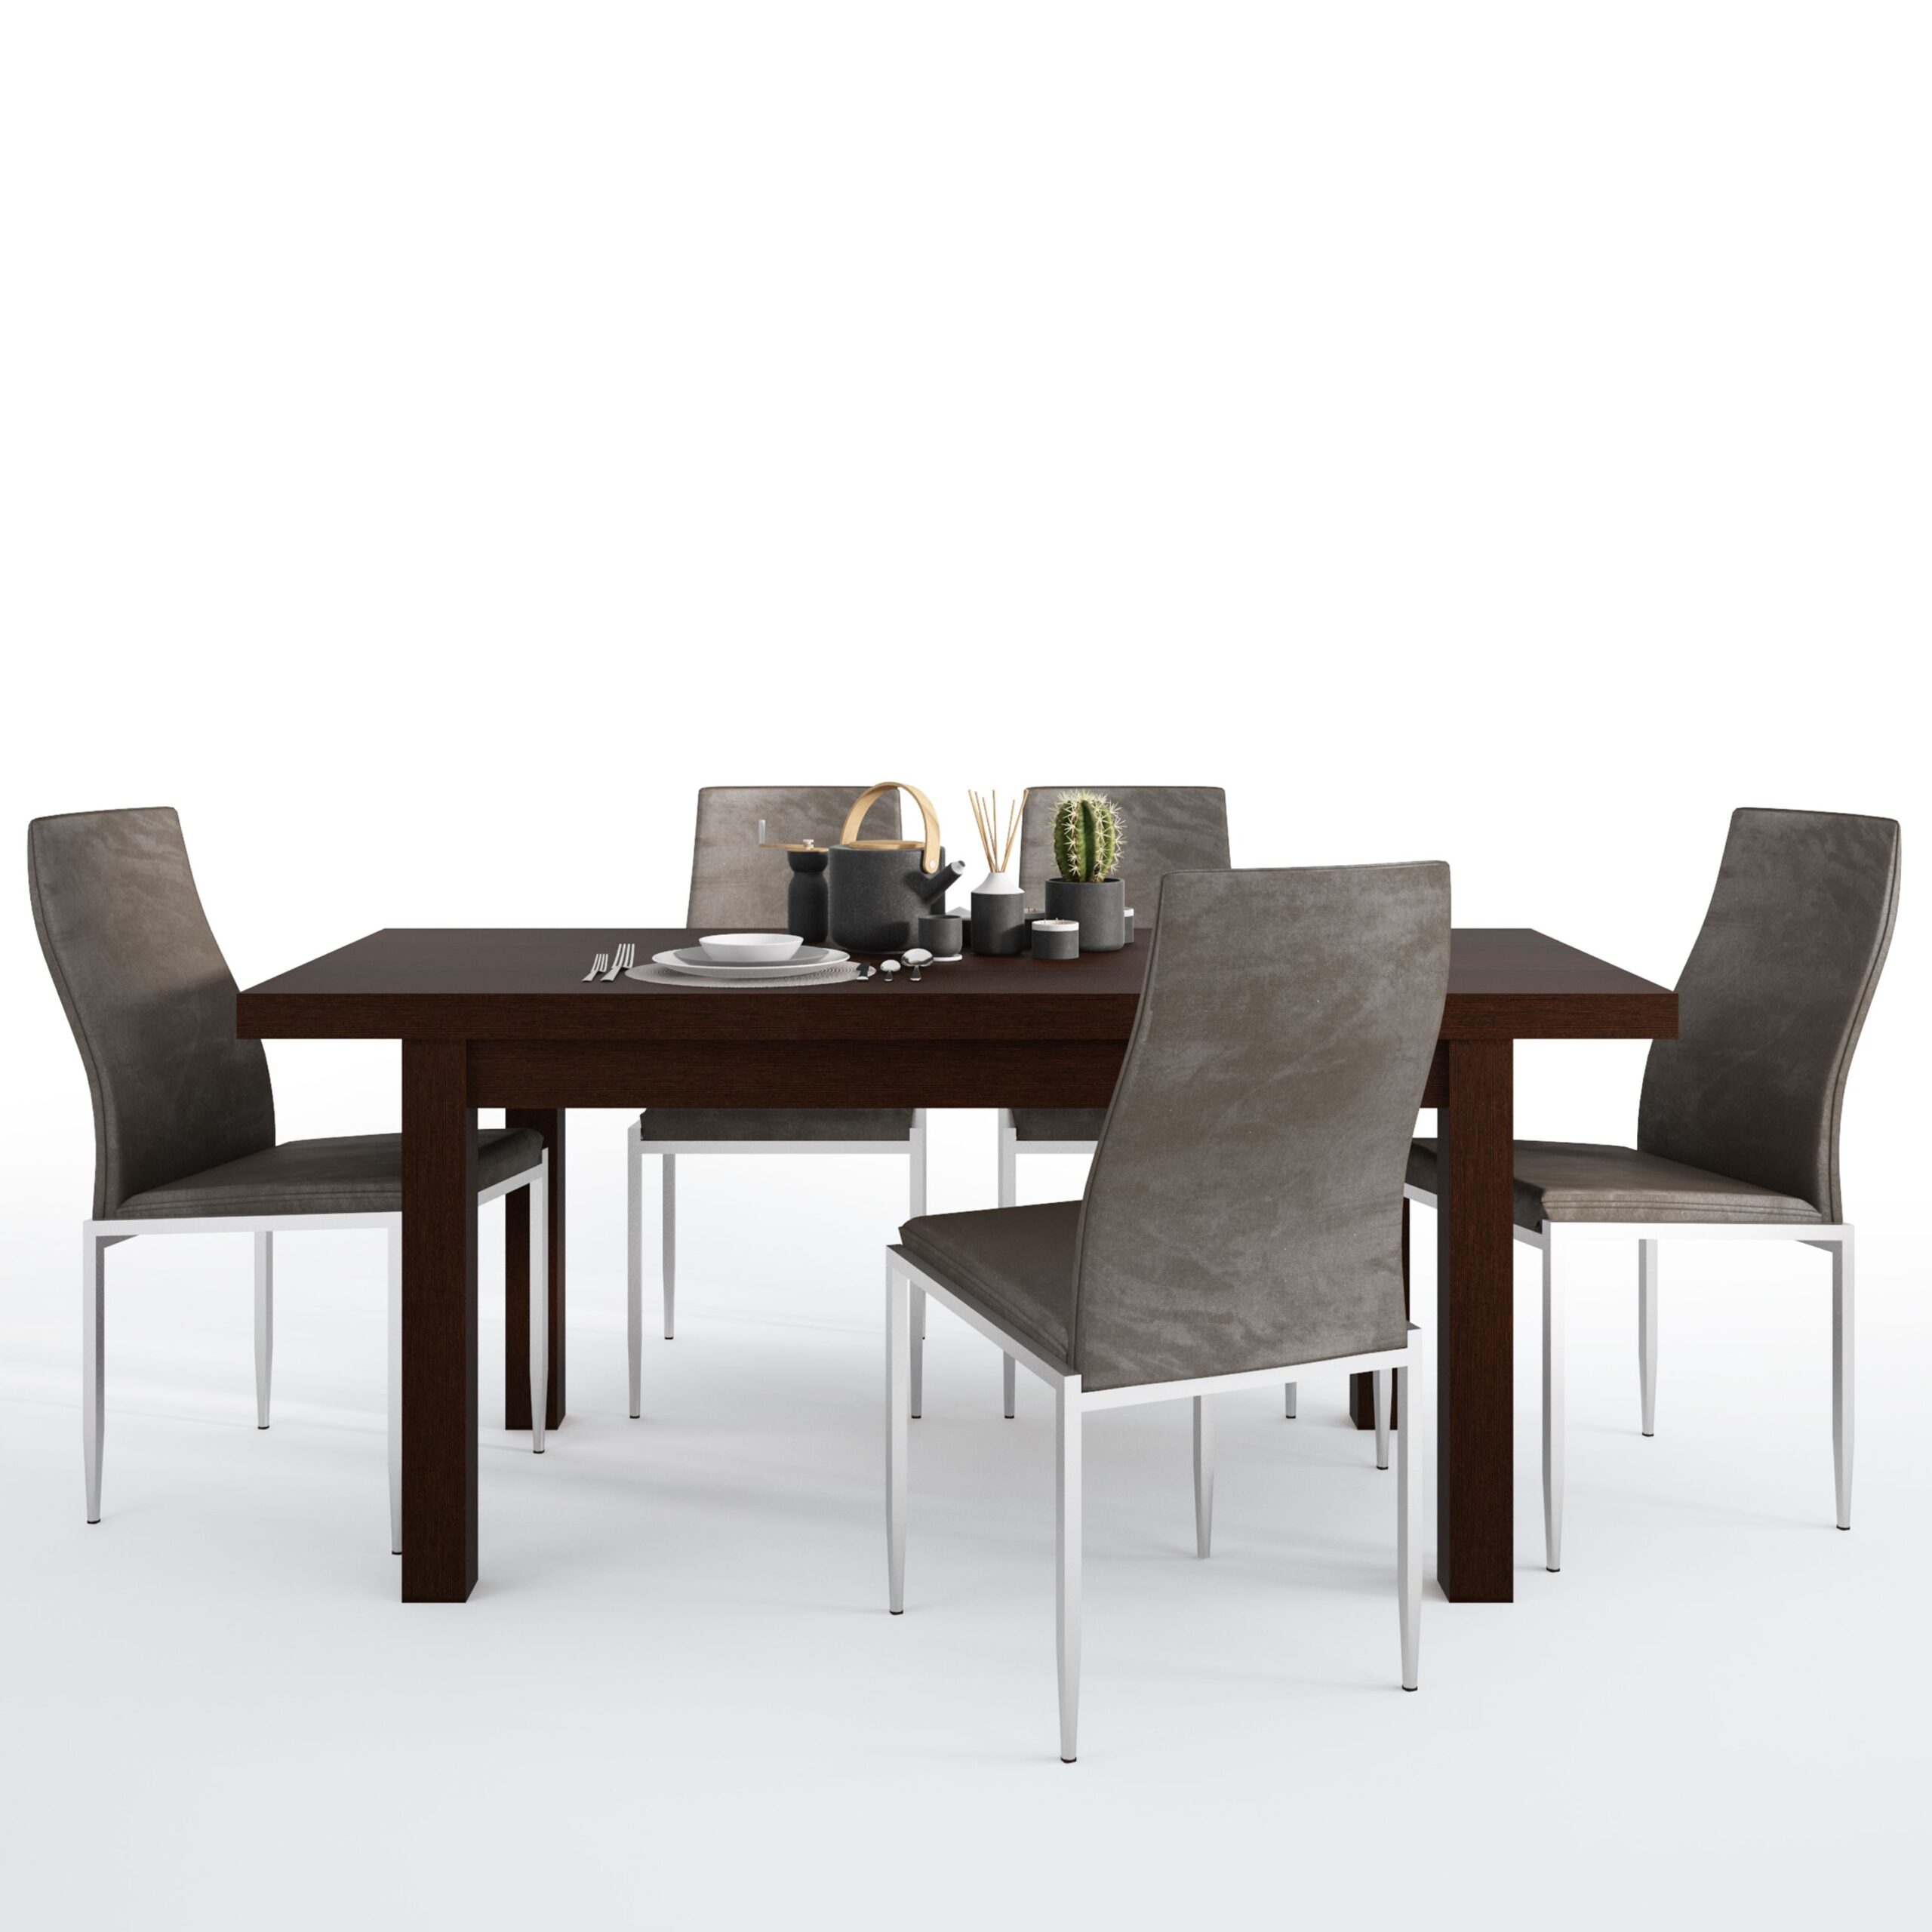 Jello Dining set package Jello Extending Dining Table in Dark Mahogany + 6 Lillie High Back Chair Dark Brown